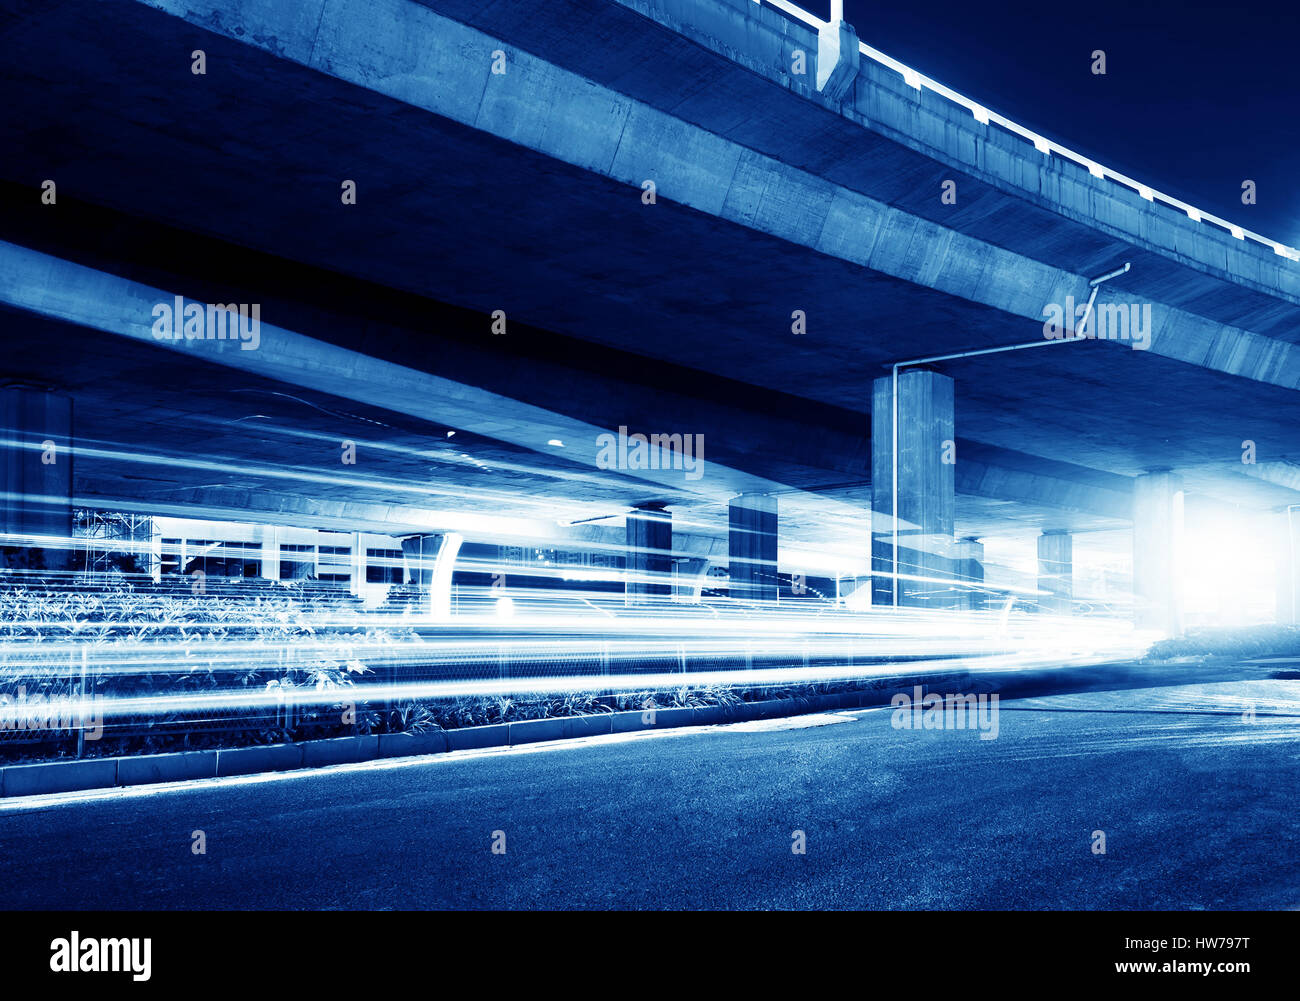 Viaduct below the light trails Stock Photo